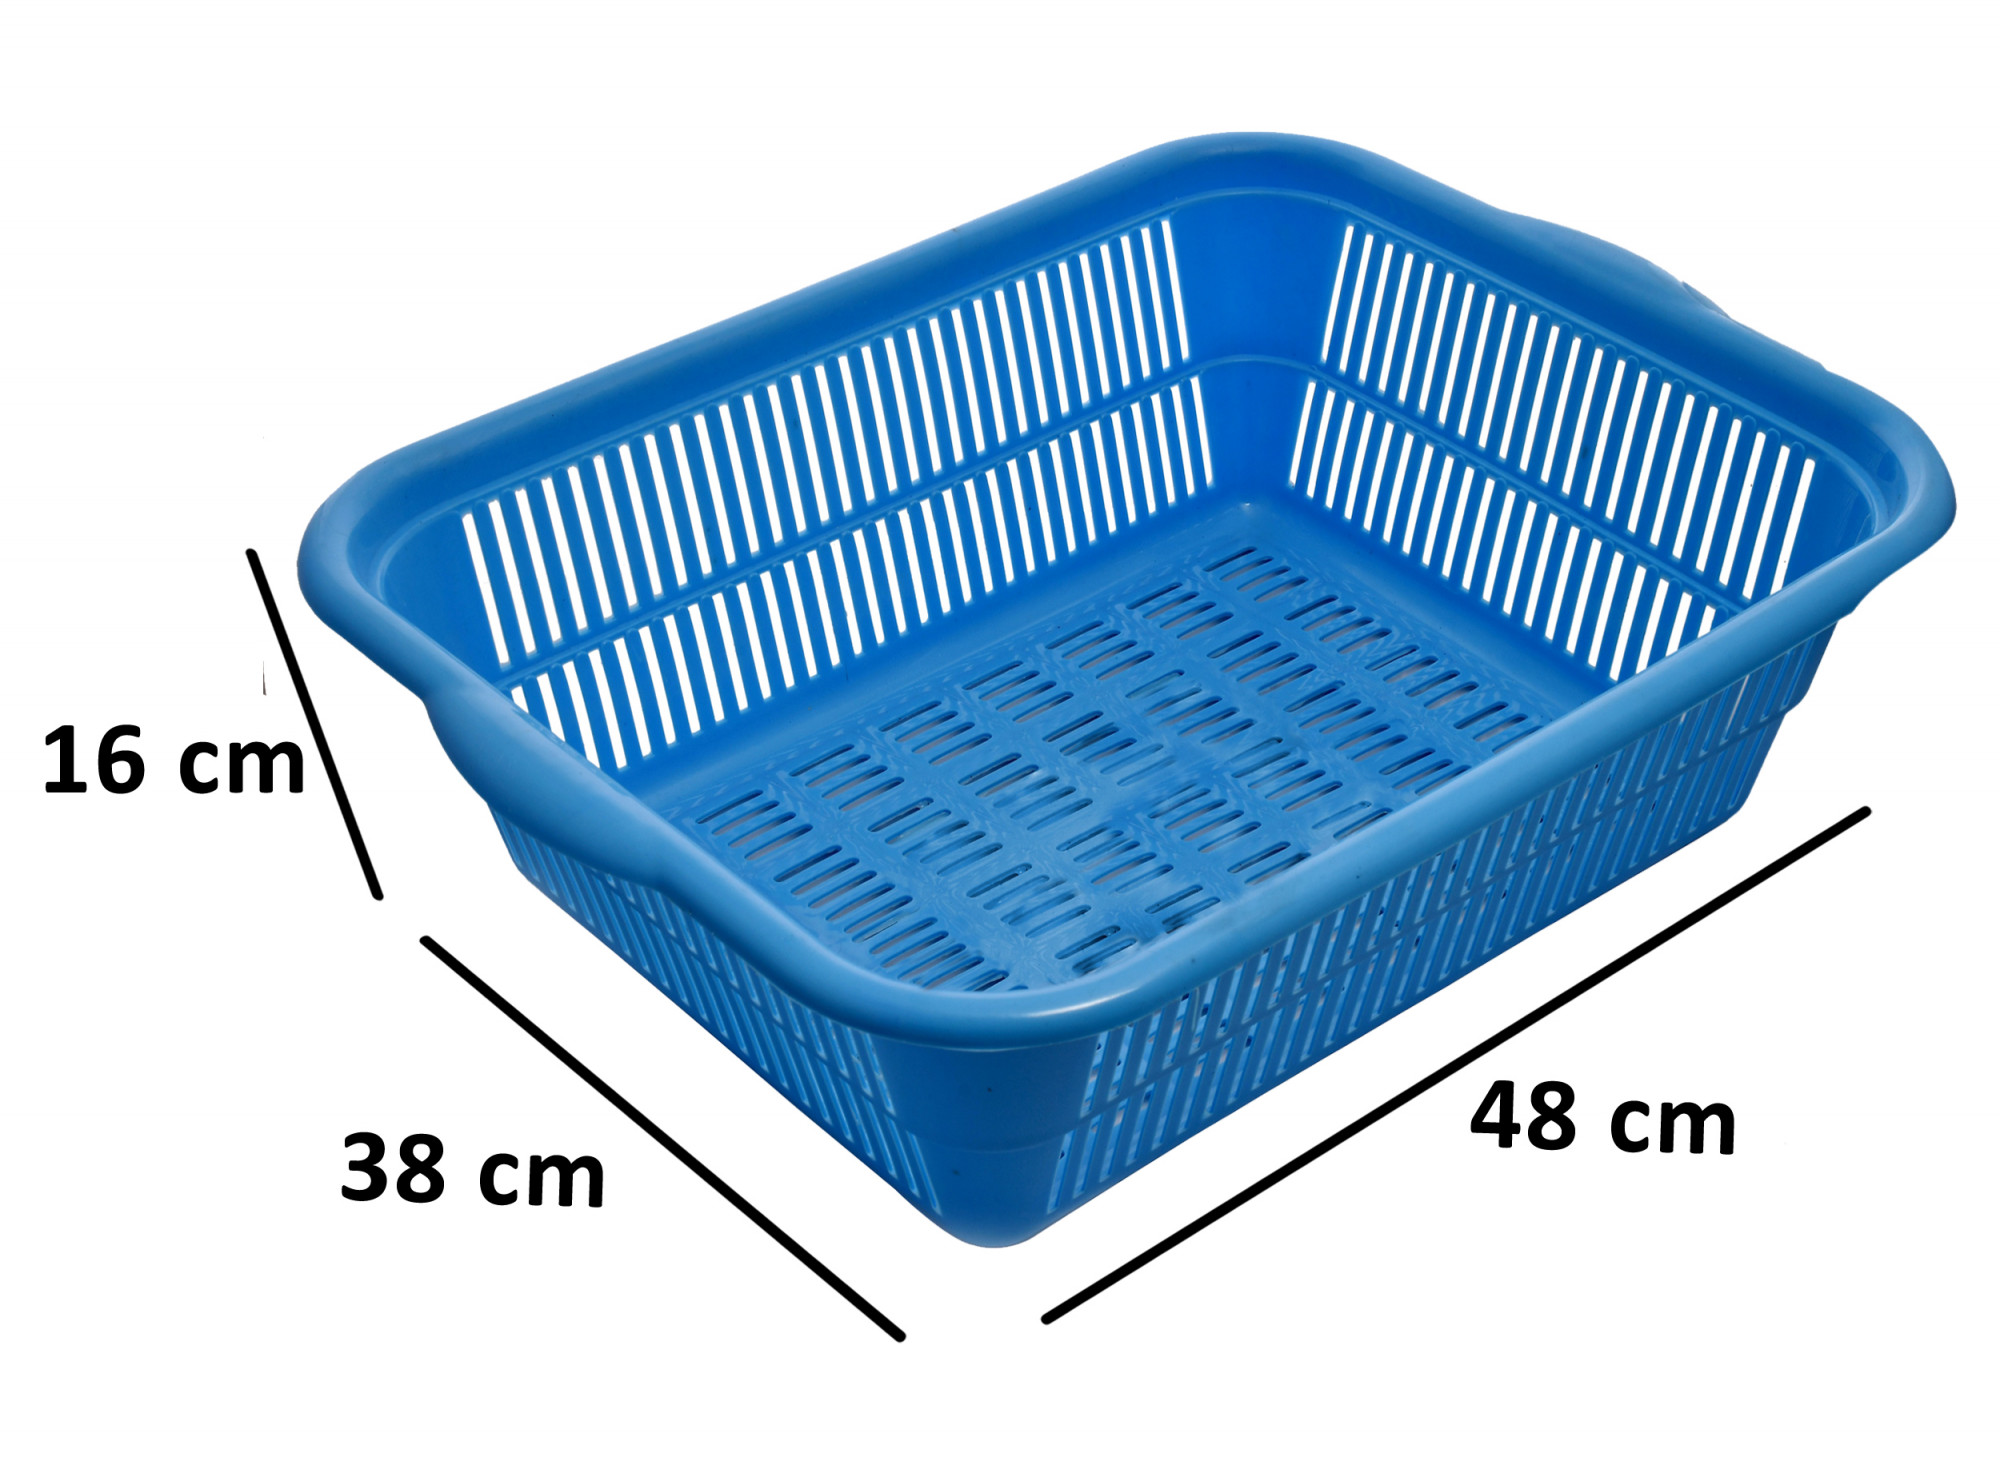 Kuber Industries 2 Pieces Plastic Kitchen Dish Rack Drainer Vegetables And Fruits Basket Dish Rack Multipurpose Organizers ,Large Size,Blue & Red